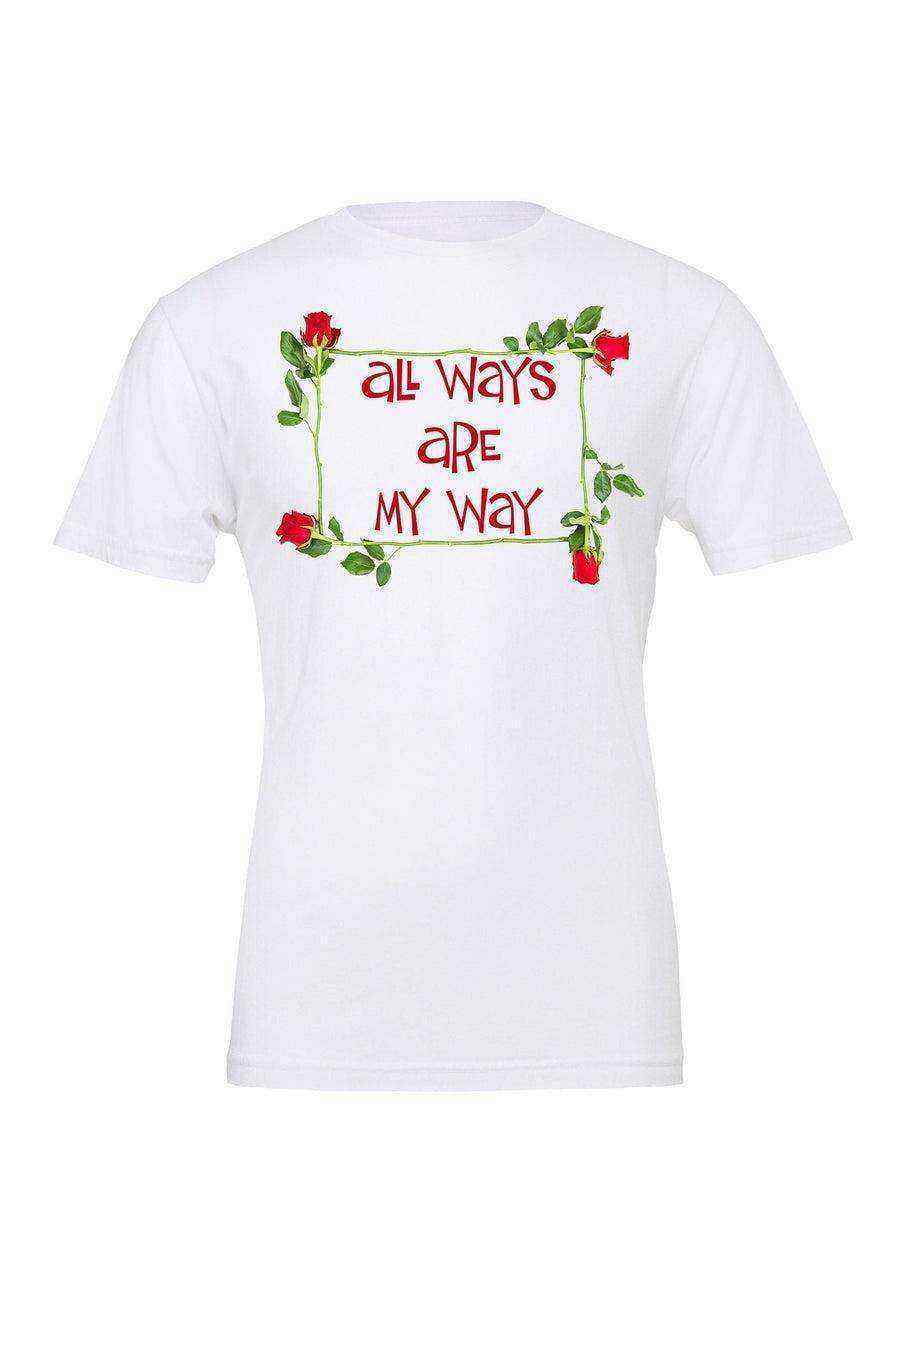 Toddler | All Ways Are My Way Shirt | Queen Of Hearts Shirt - Dylan's Tees